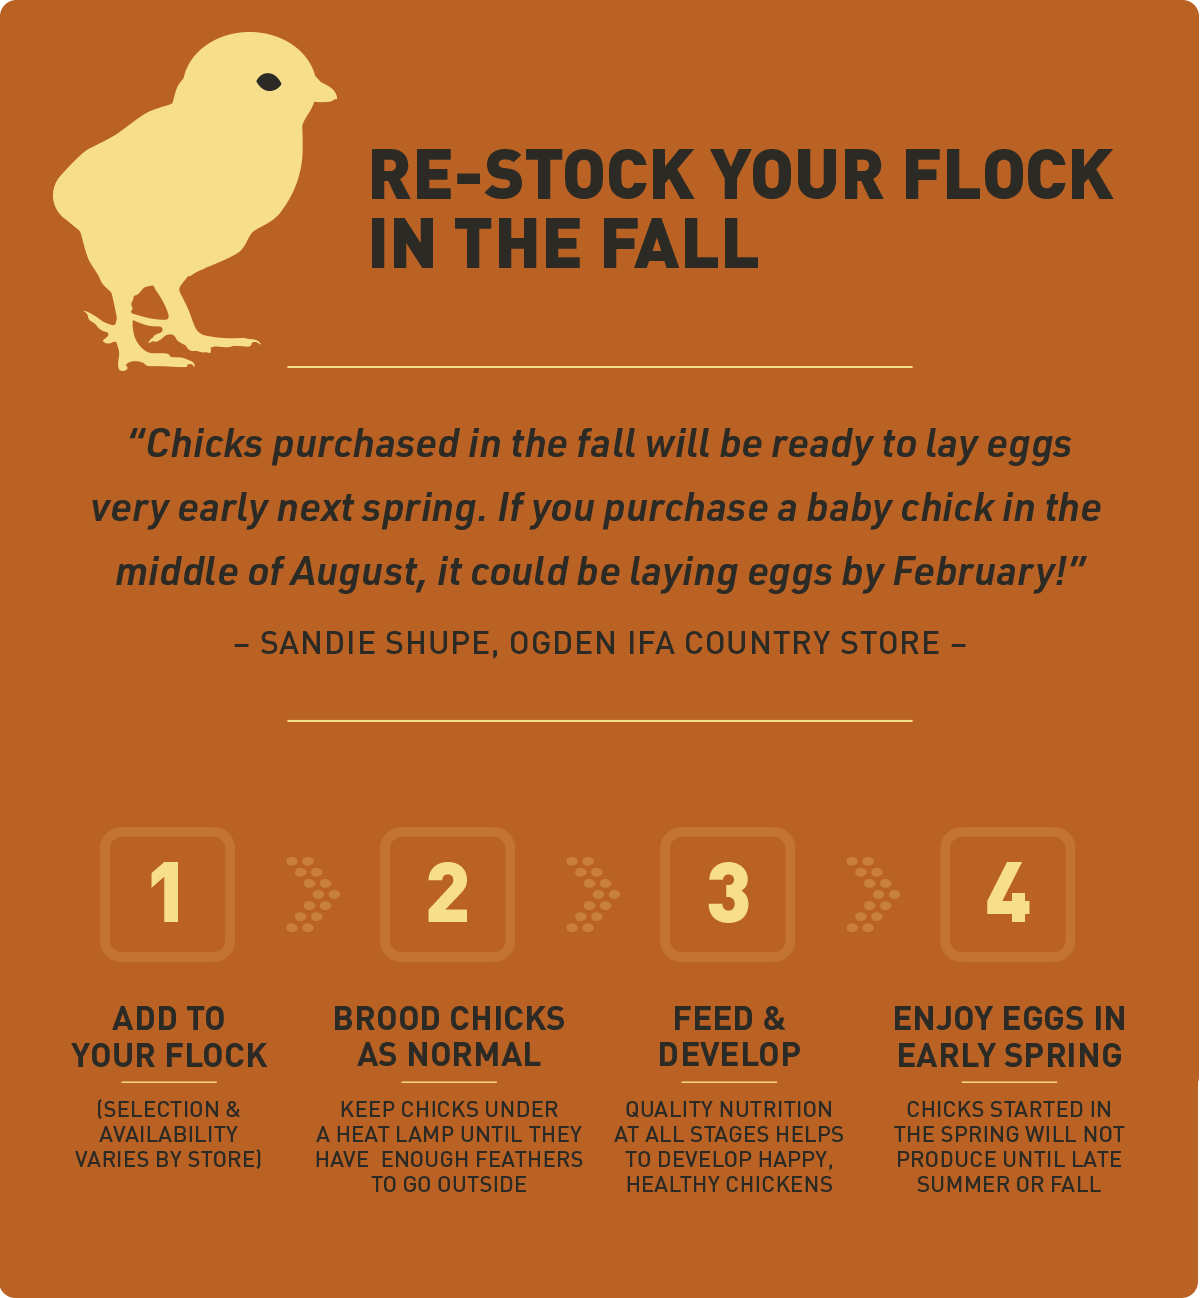 infographic for restocking your chicken flock in the fall